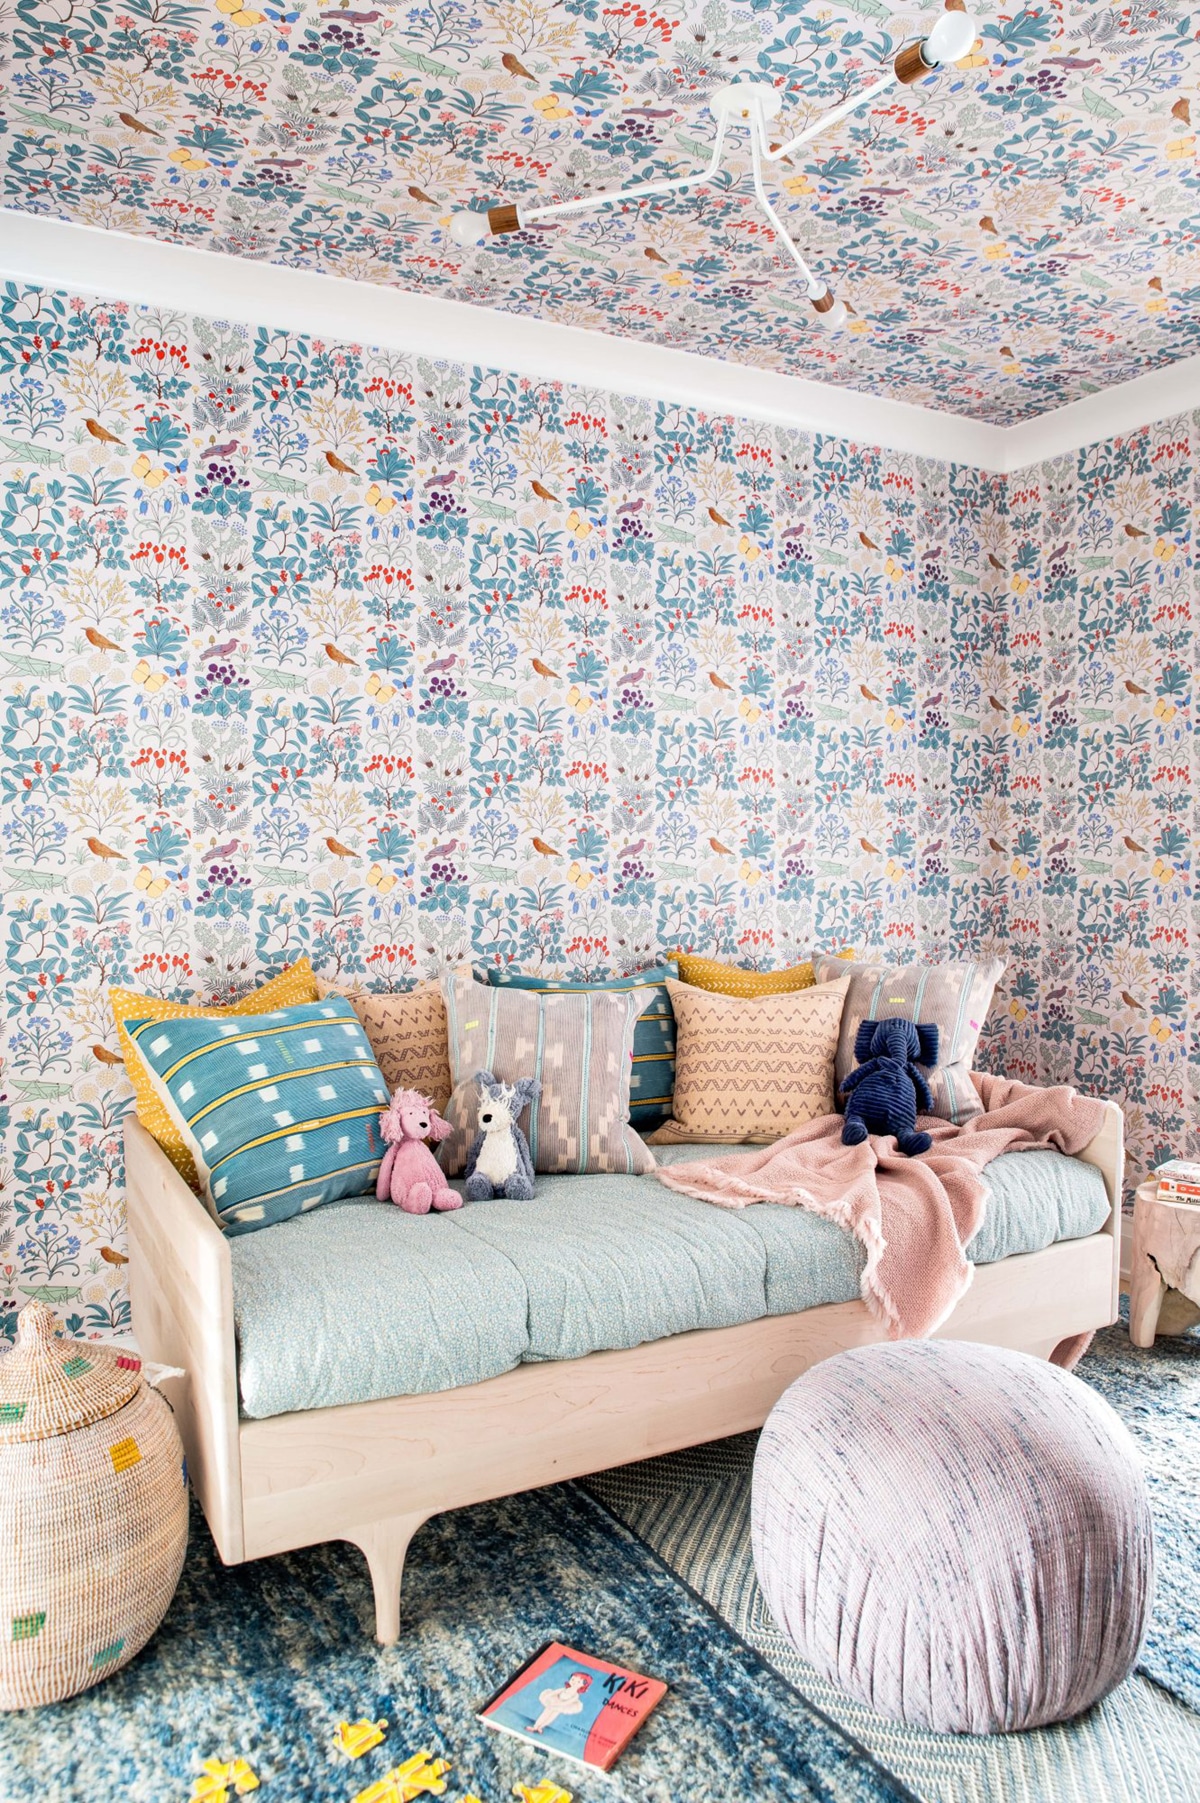 layers of pattern in the wallpaper rugs and daybed in this fun kids playroom! | house tour on coco kelley